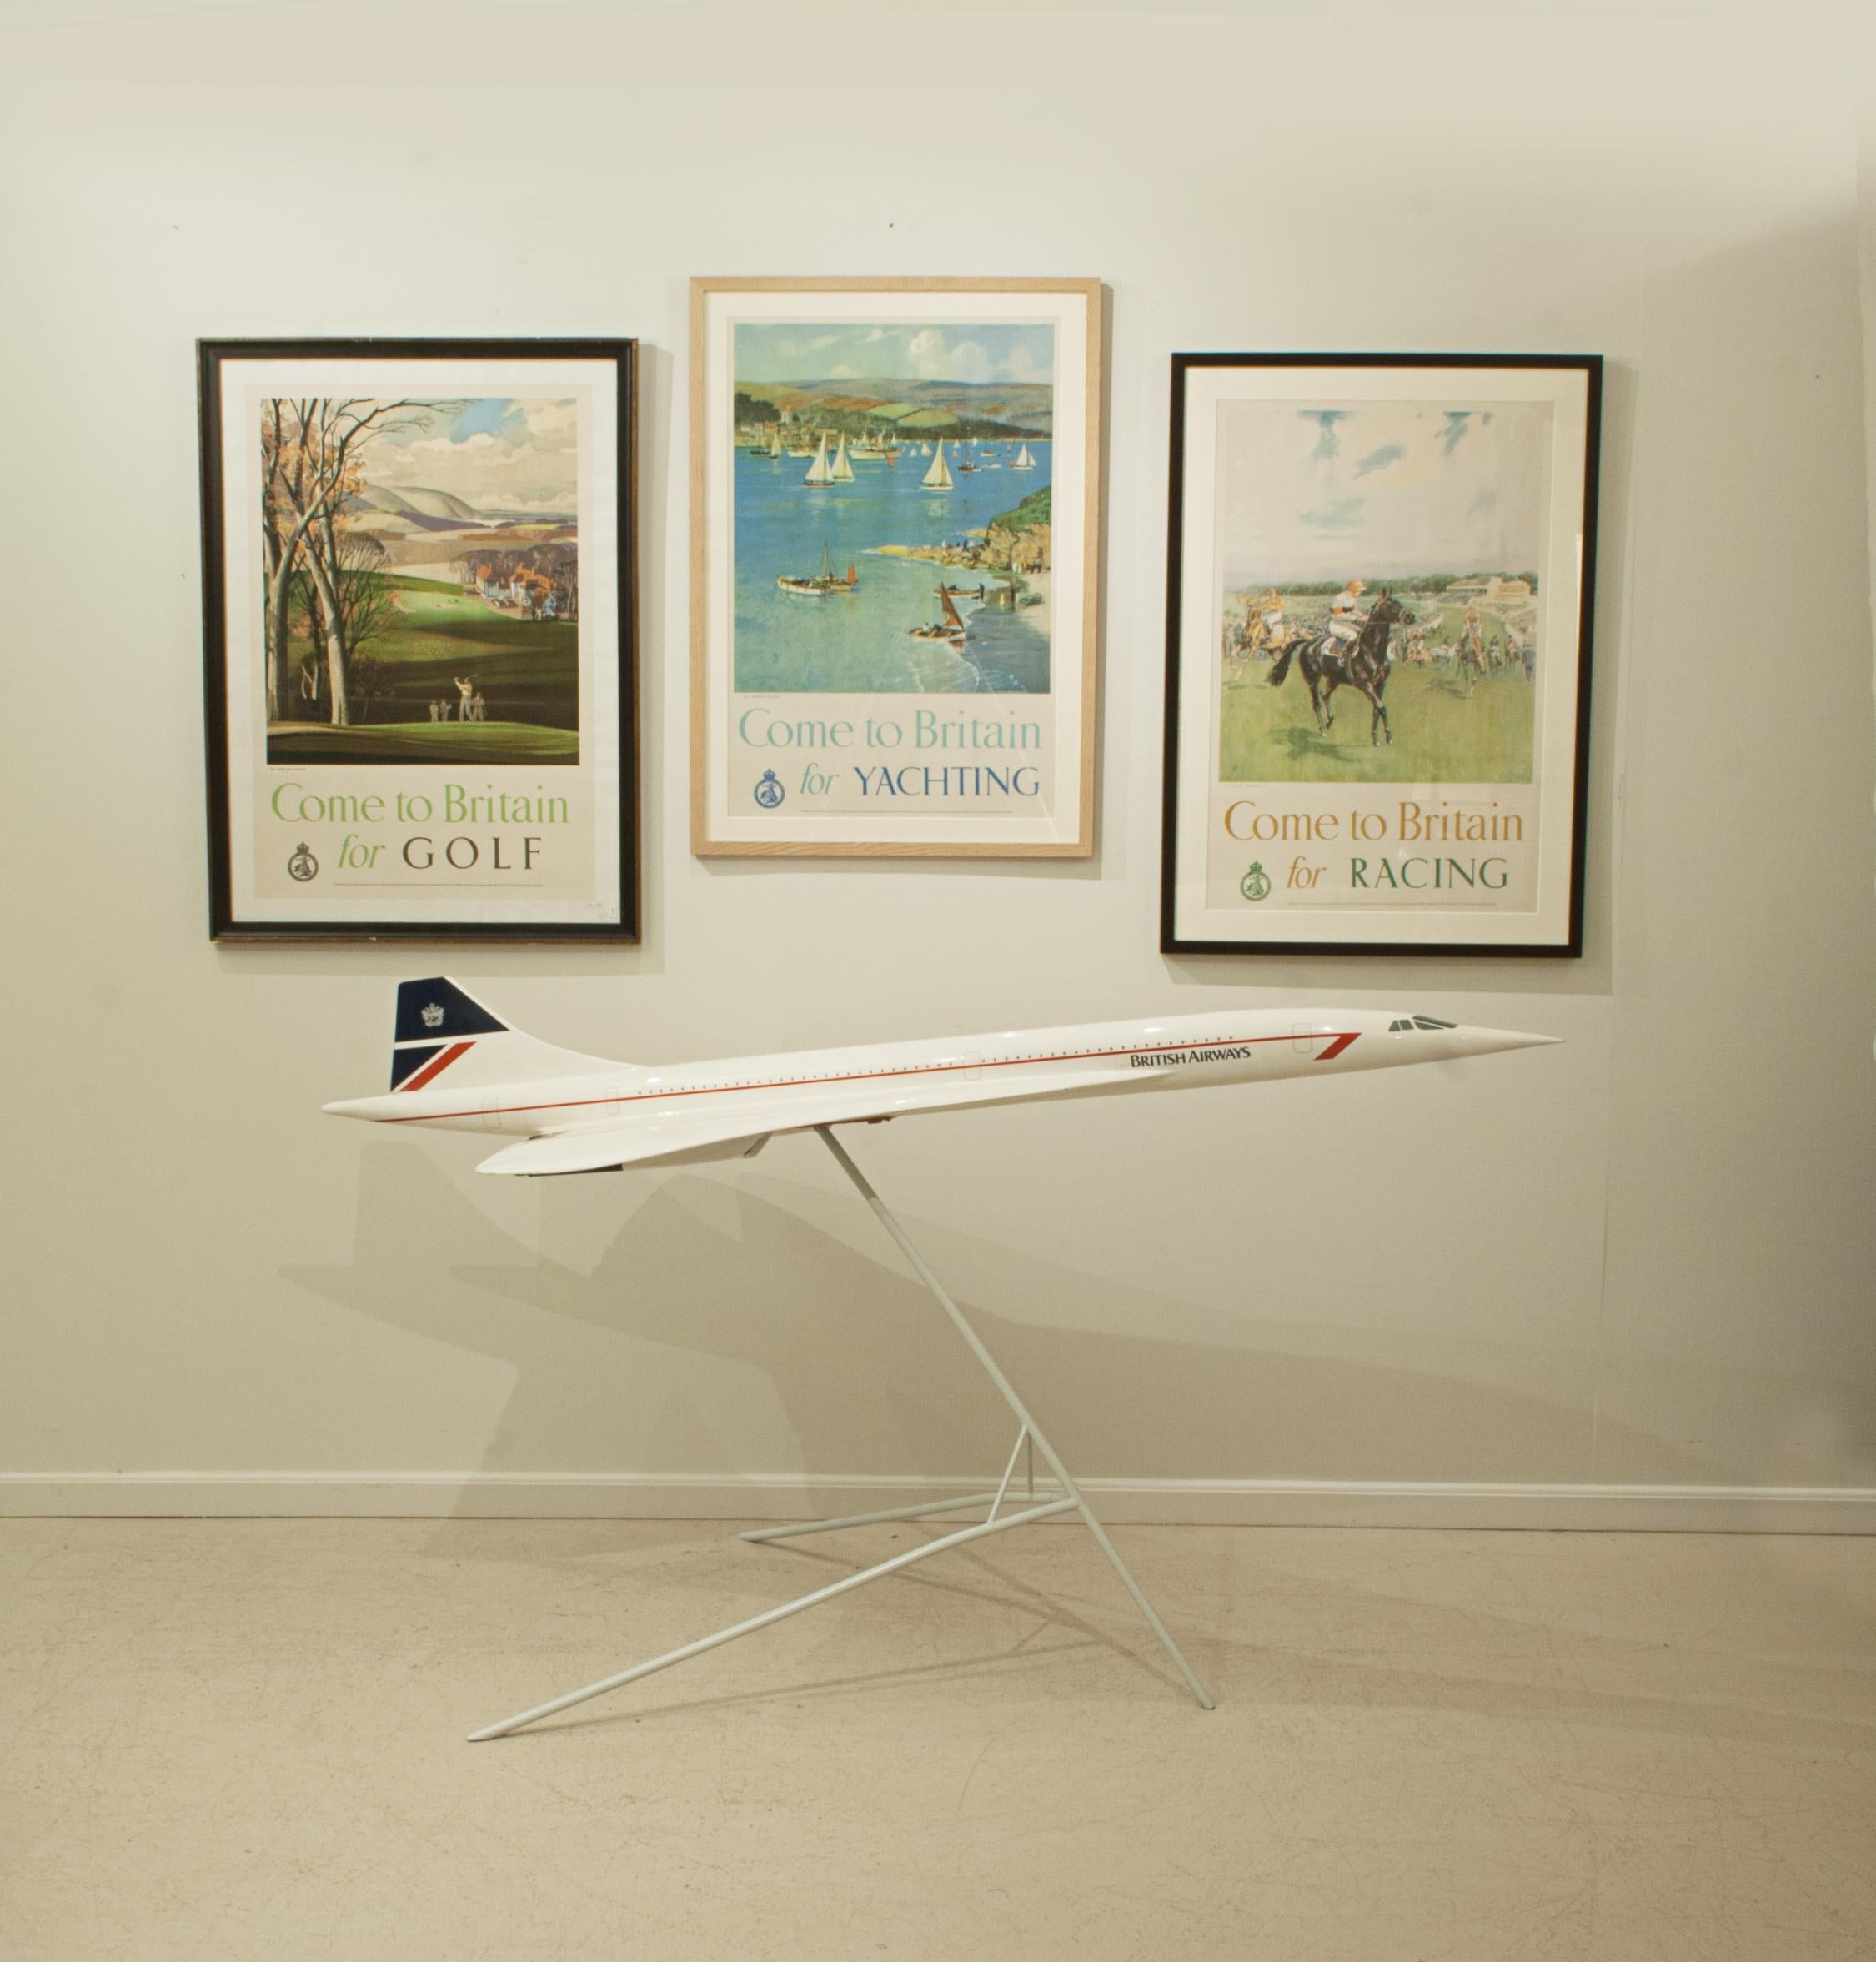 Rare Vintage 1:36 6' British Airways Concorde Aeroplane Model
A very fine and rare vintage fibreglass and resin composite 1:36 scale model of Concorde in full British Airways 'Landor' livery. The splendid composite model is mounted on a tripod